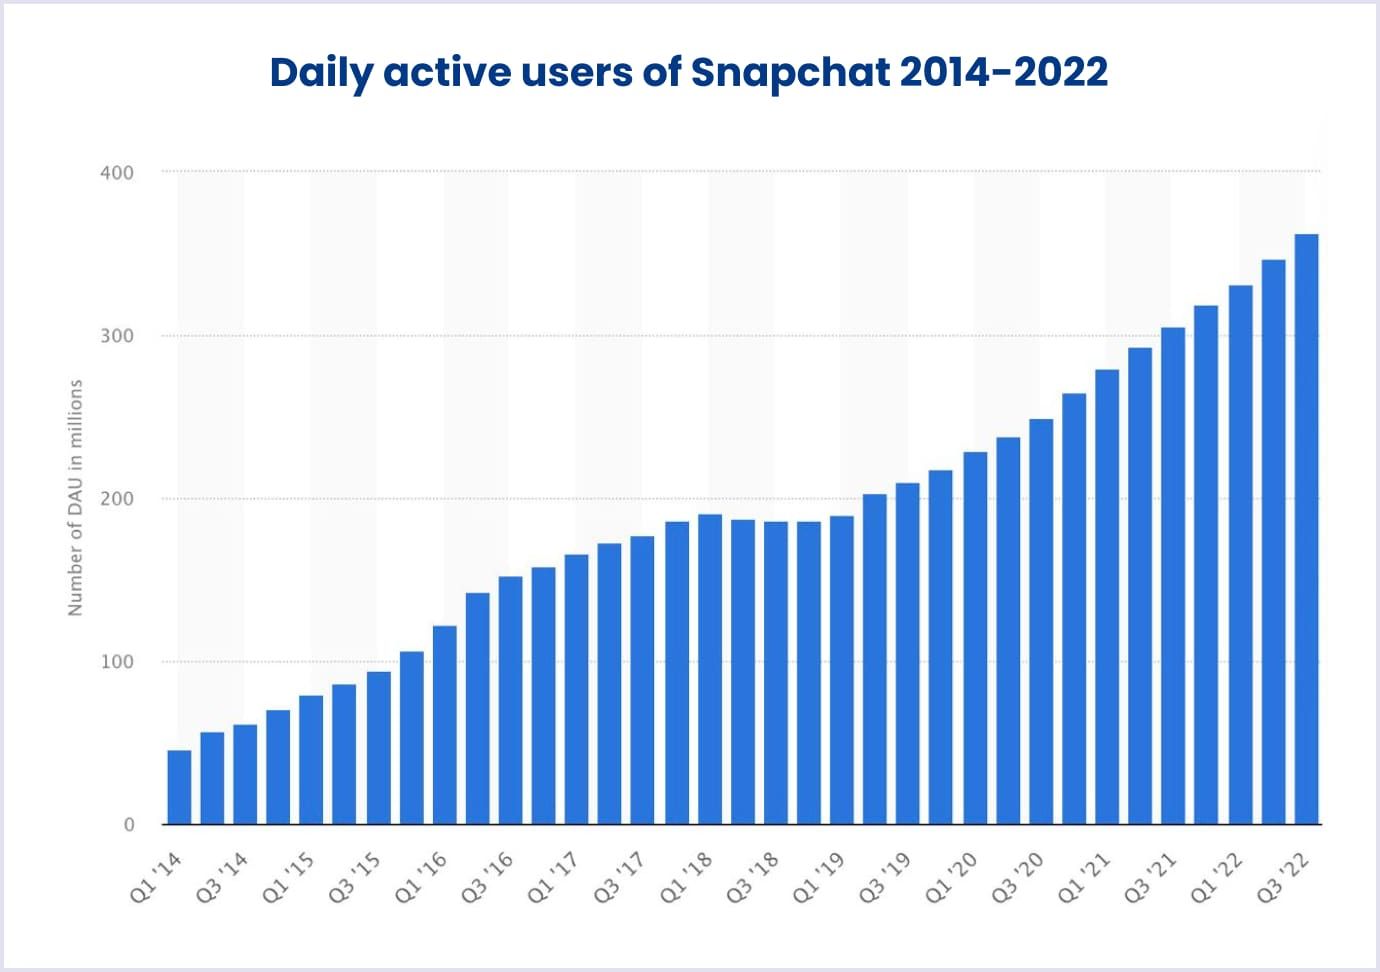 Number of daily active Snapchat users from 1st quarter 2014 to 3rd quarter 2022